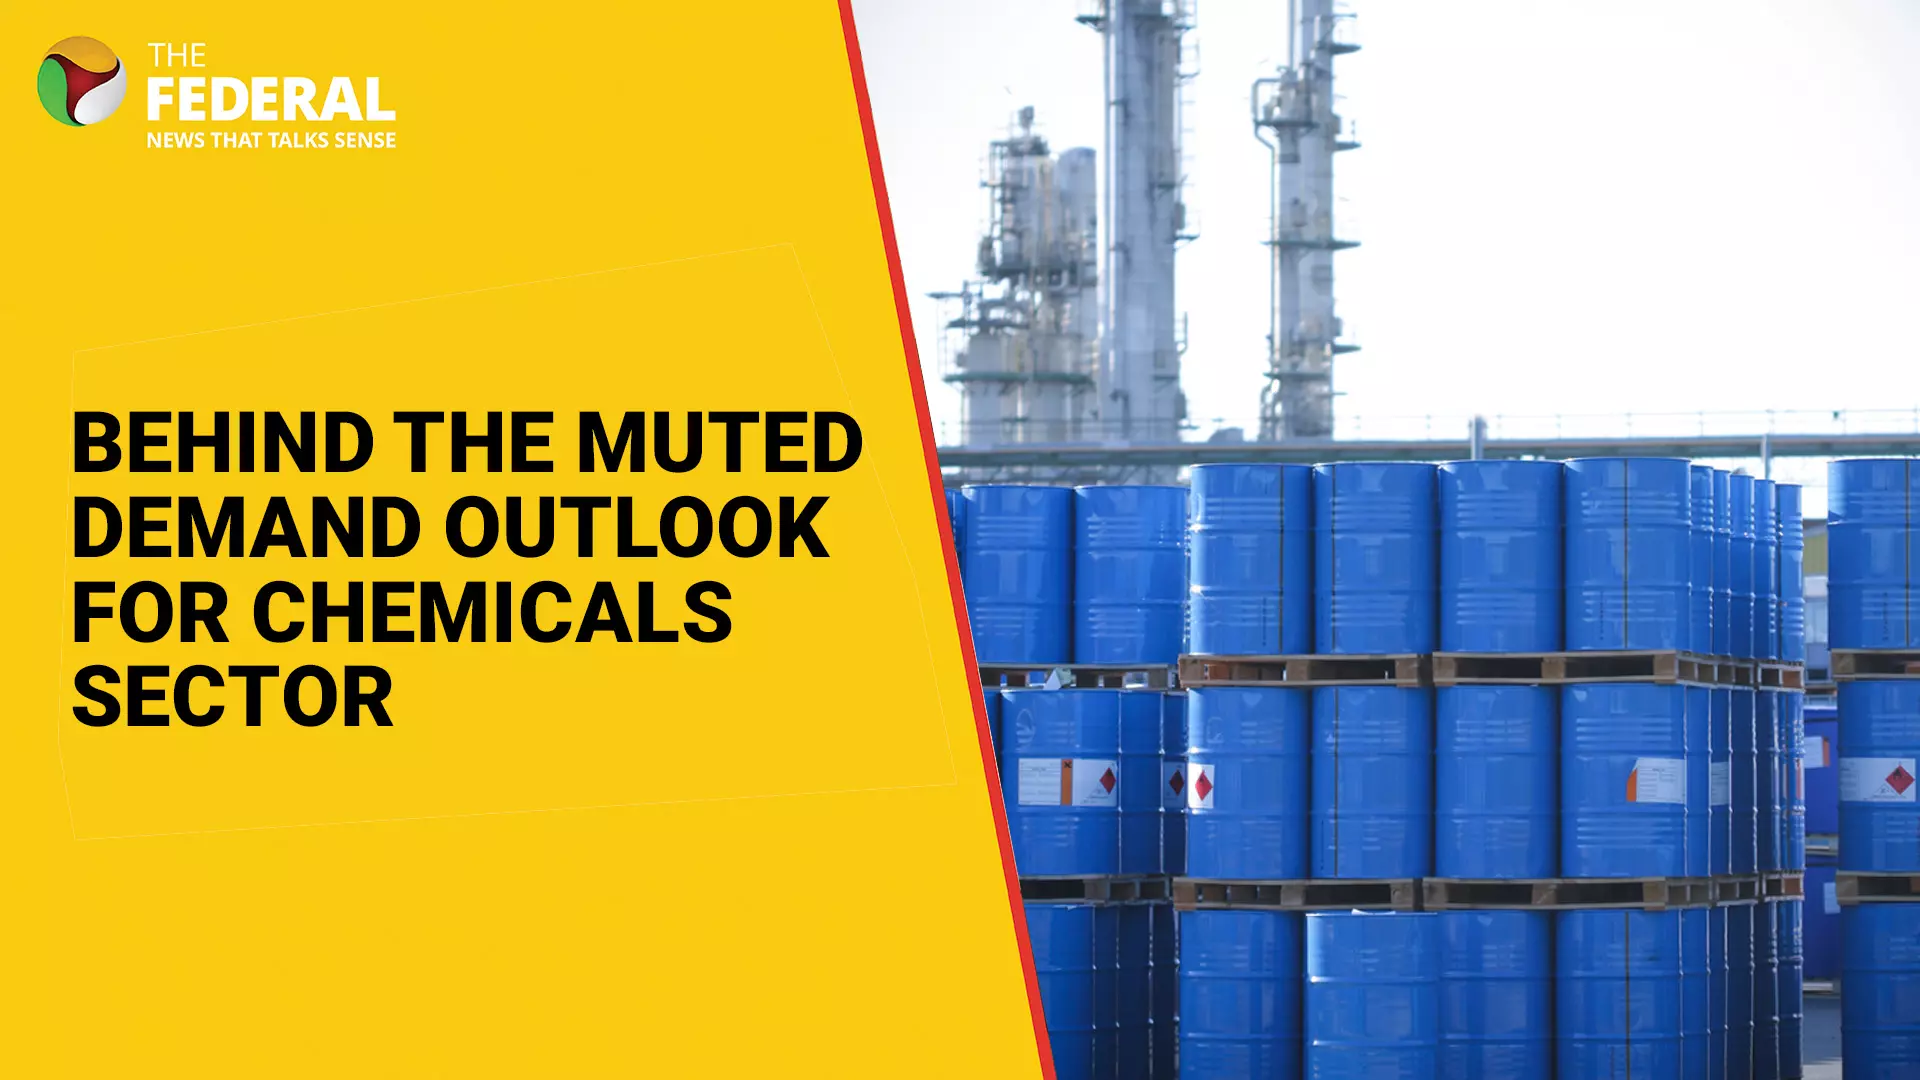 Behind the muted demand outlook for chemicals sector